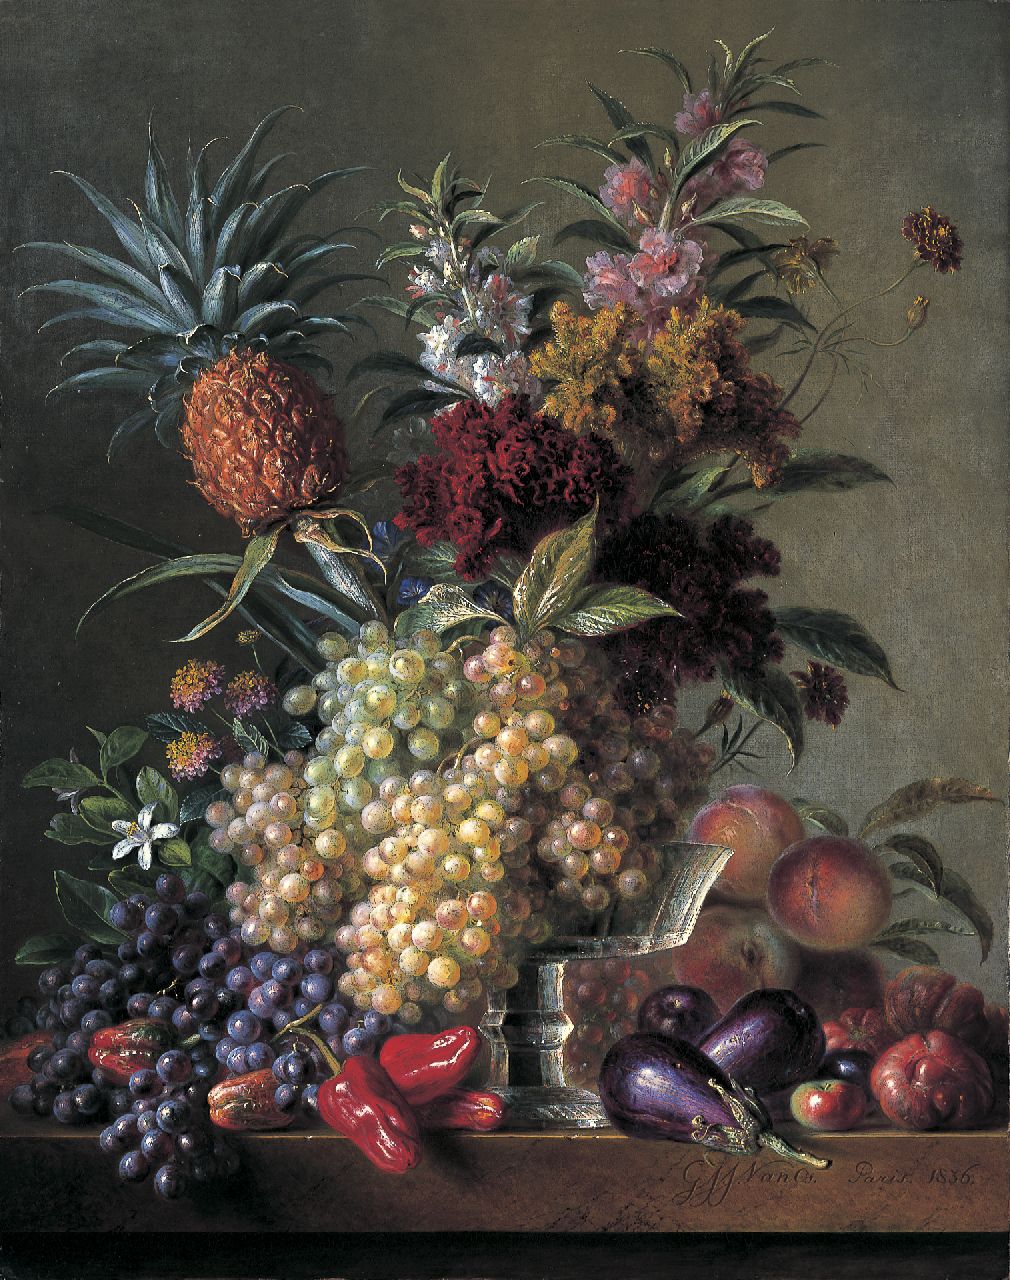 Os G.J.J. van | Georgius Jacobus Johannes van Os, A still life with fruits and flowers, oil on canvas 92.5 x 73.3 cm, signed l.r. and dated 1836